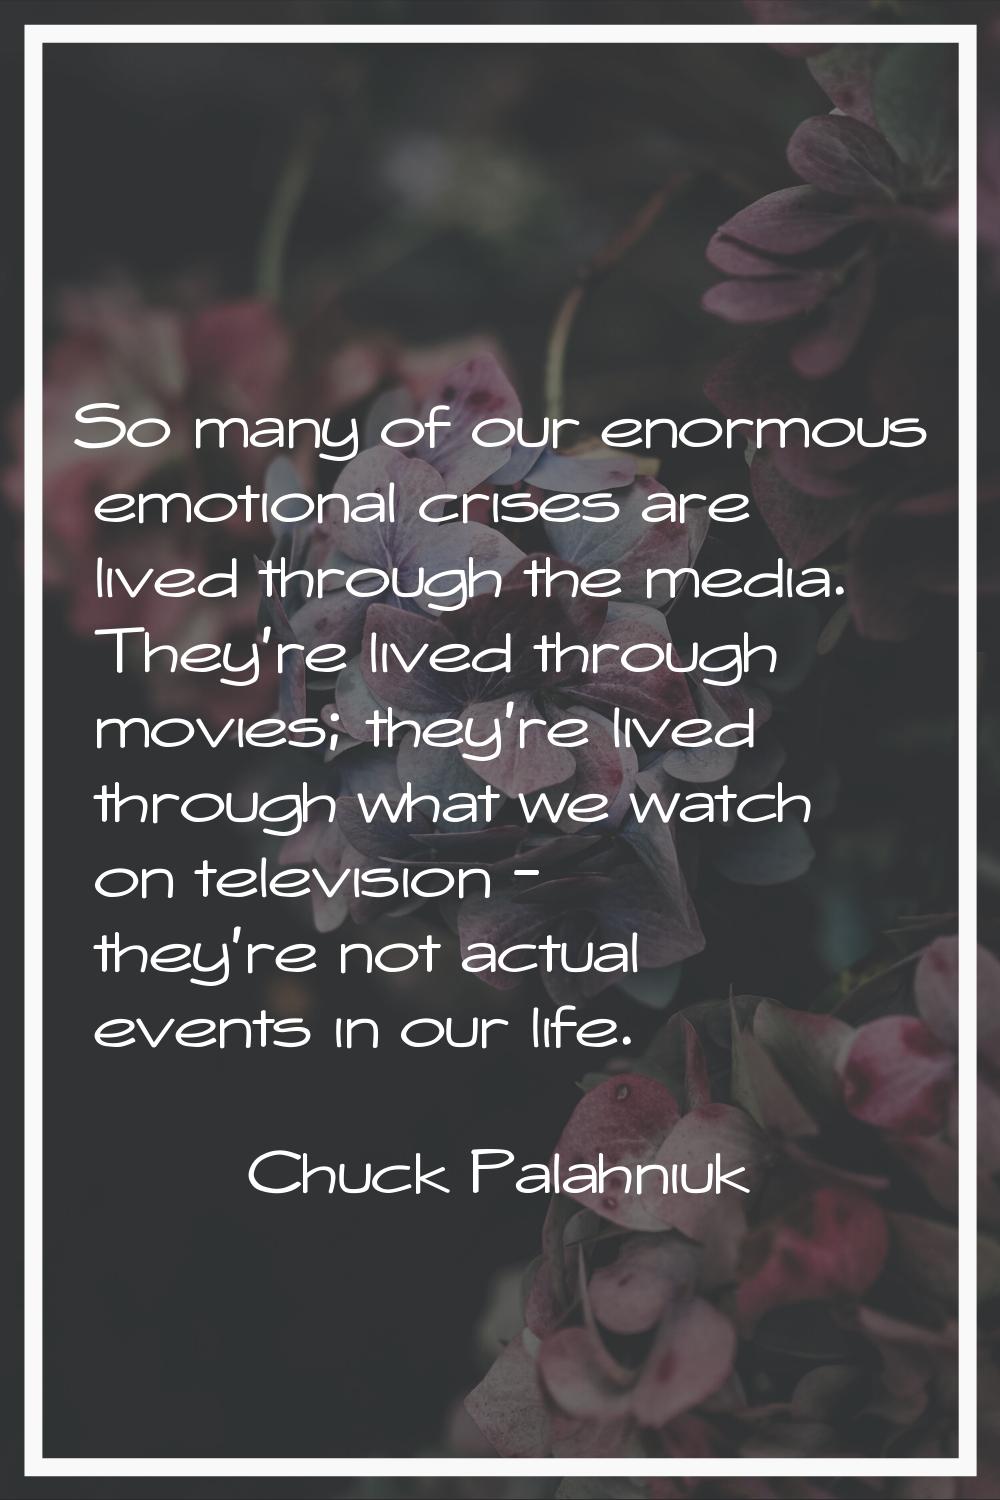 So many of our enormous emotional crises are lived through the media. They're lived through movies;